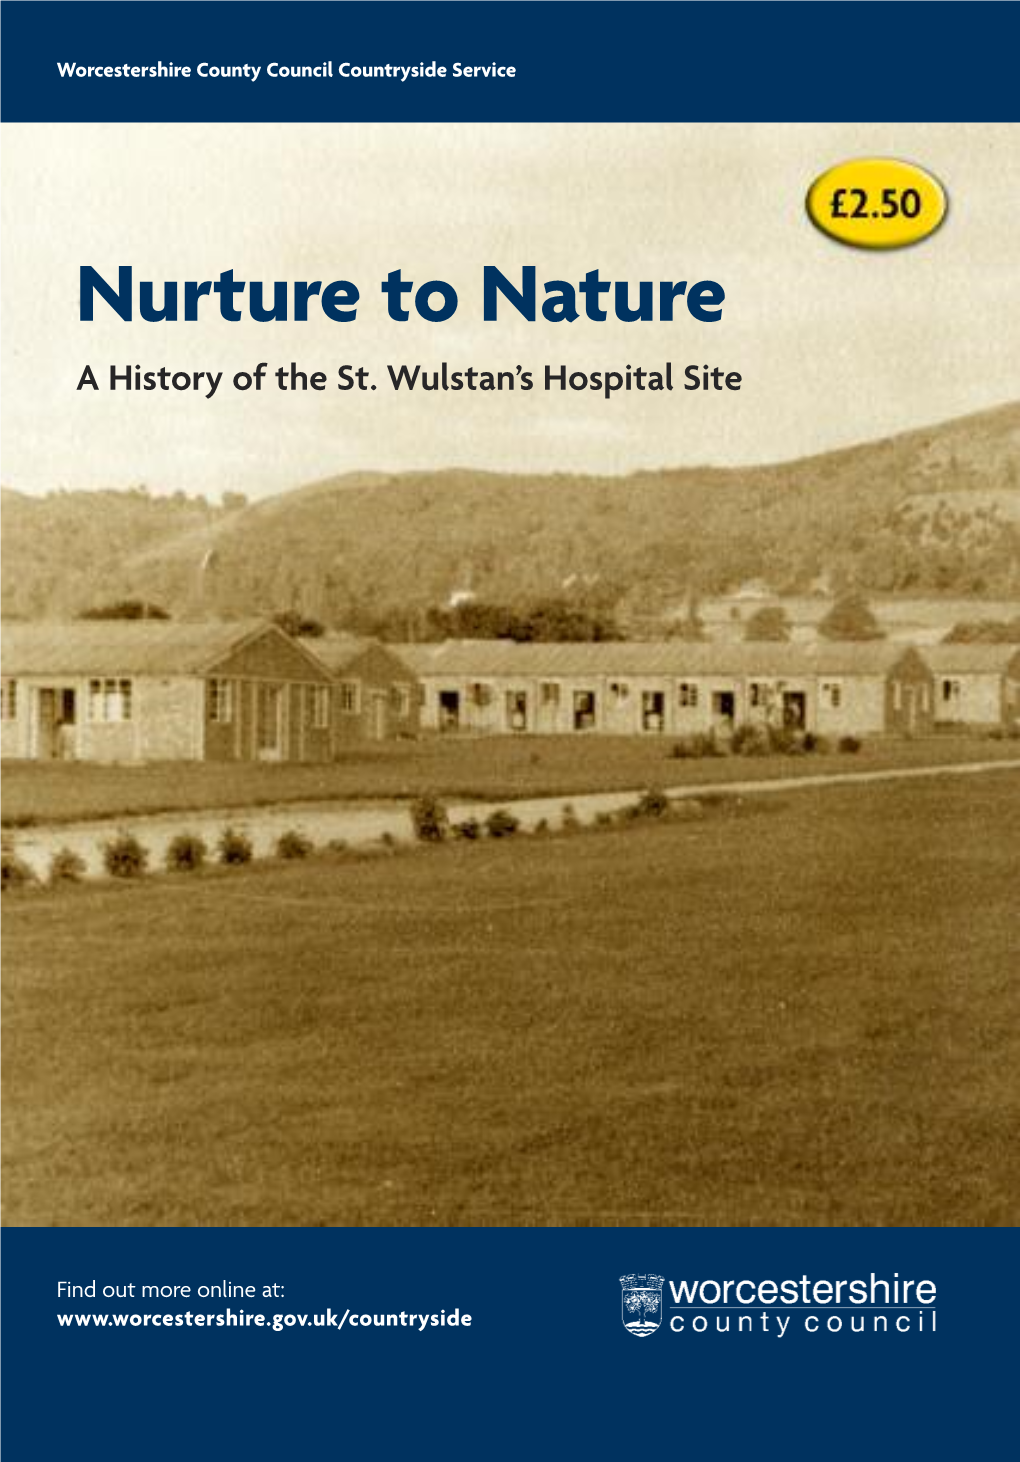 Nurture to Nature a History of the St